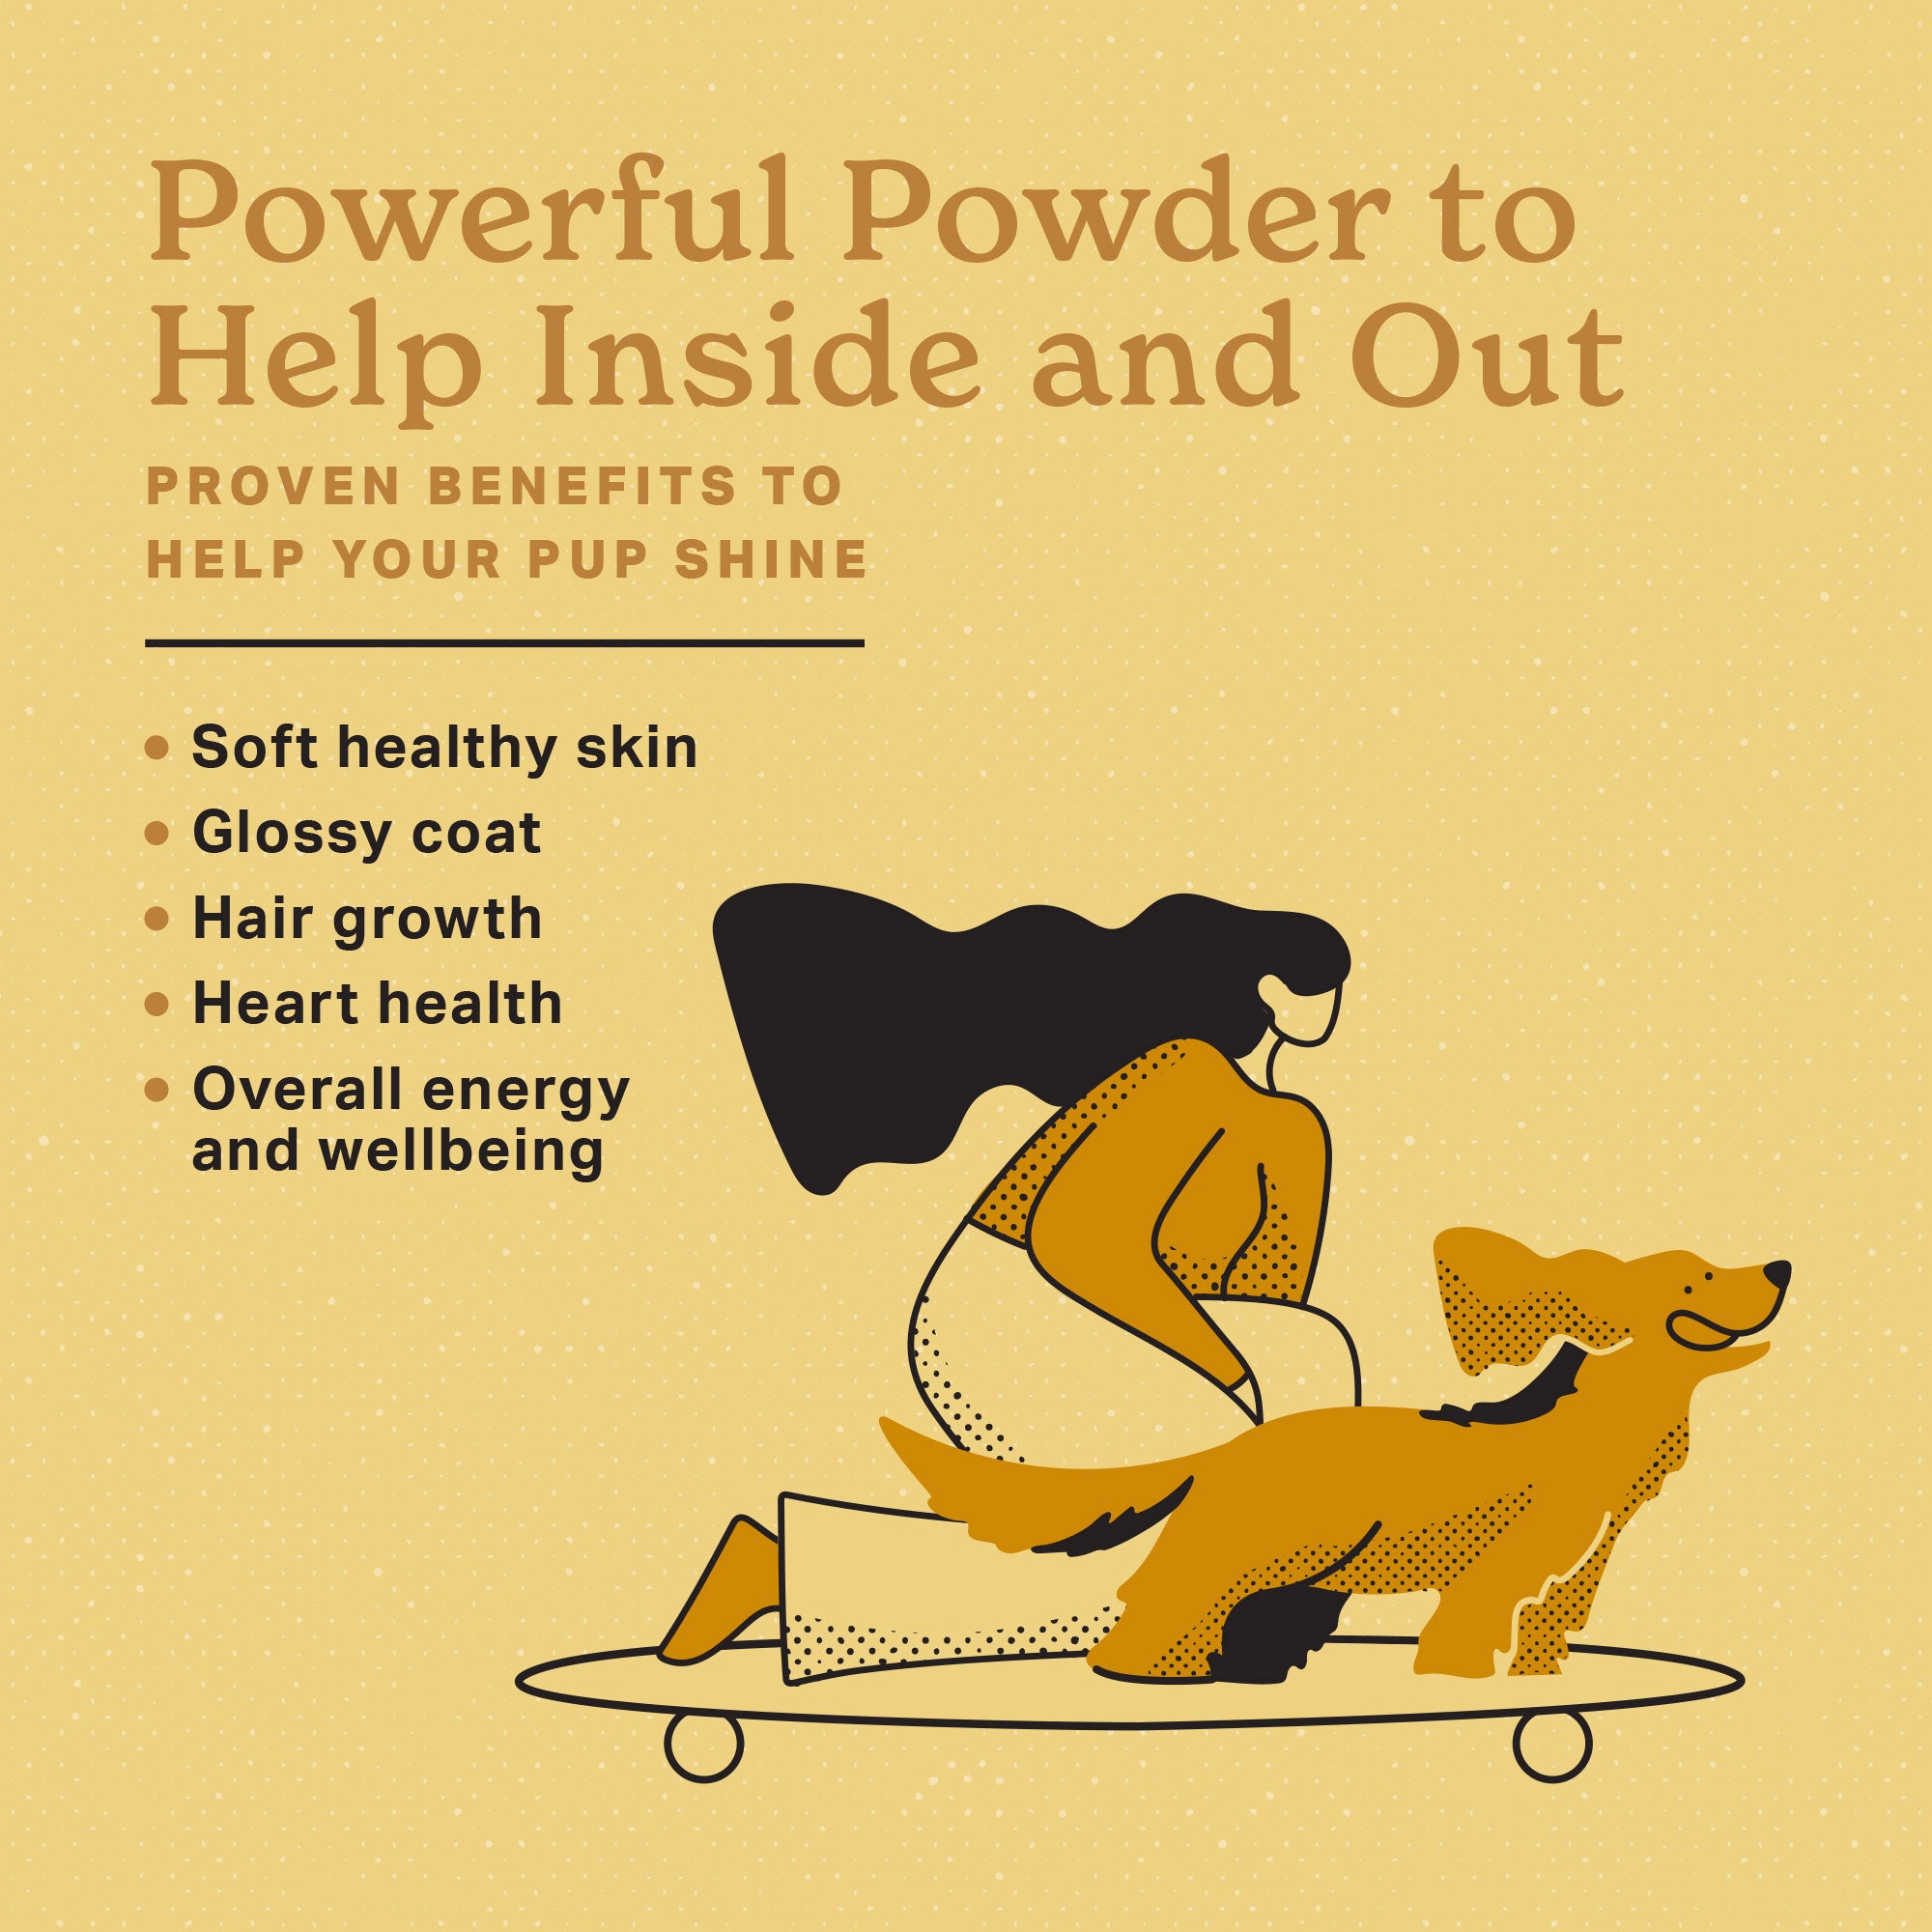 Powerful Powder to help inside and out.  Proven benefits to help your pup shine.  Soft healthy skin, glossy coat, hair growth, heart health, overall energy and wellbeing.  Girl riding a skateboard with her dog on the front ears flapping, tongue hanging and loving life.